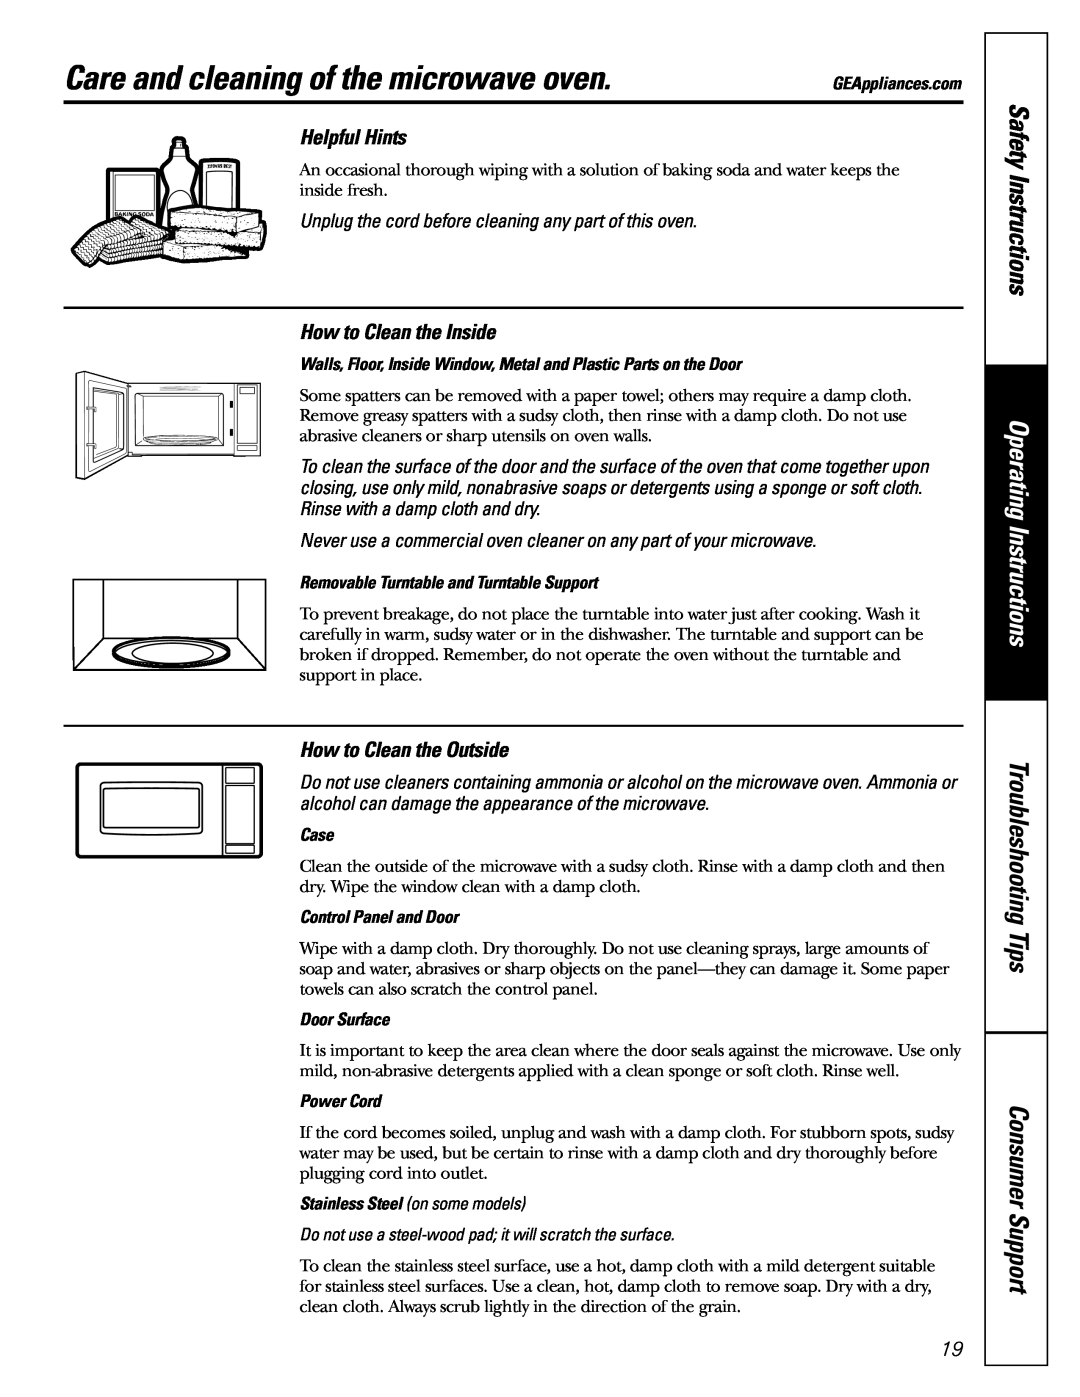 GE Monogram JES1142SJ Care and cleaning of the microwave oven, Safety Instructions, Operating Instructions, Helpful Hints 